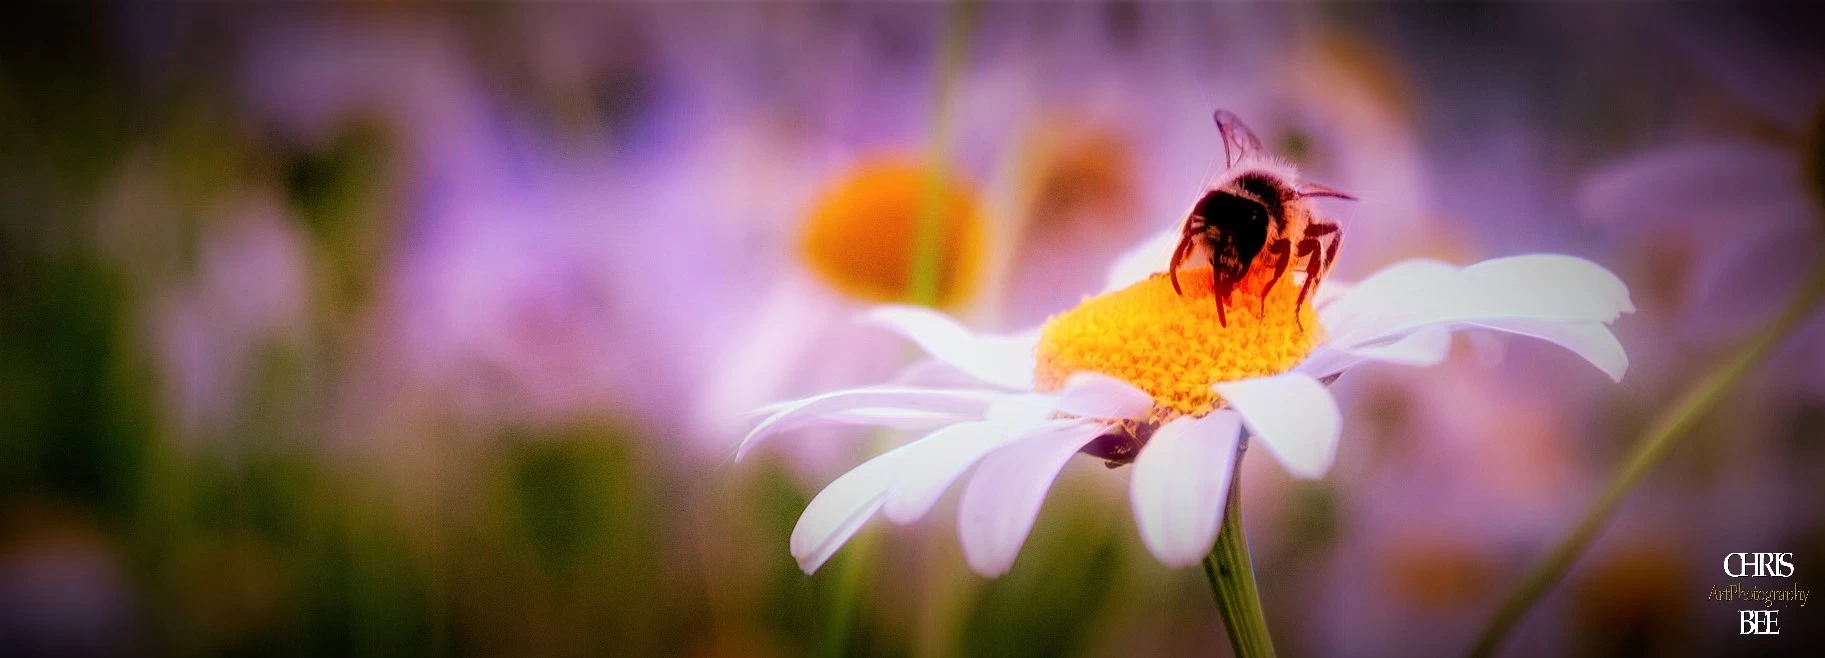 Bee on a Camomile di Chris Bee ArtPhotography